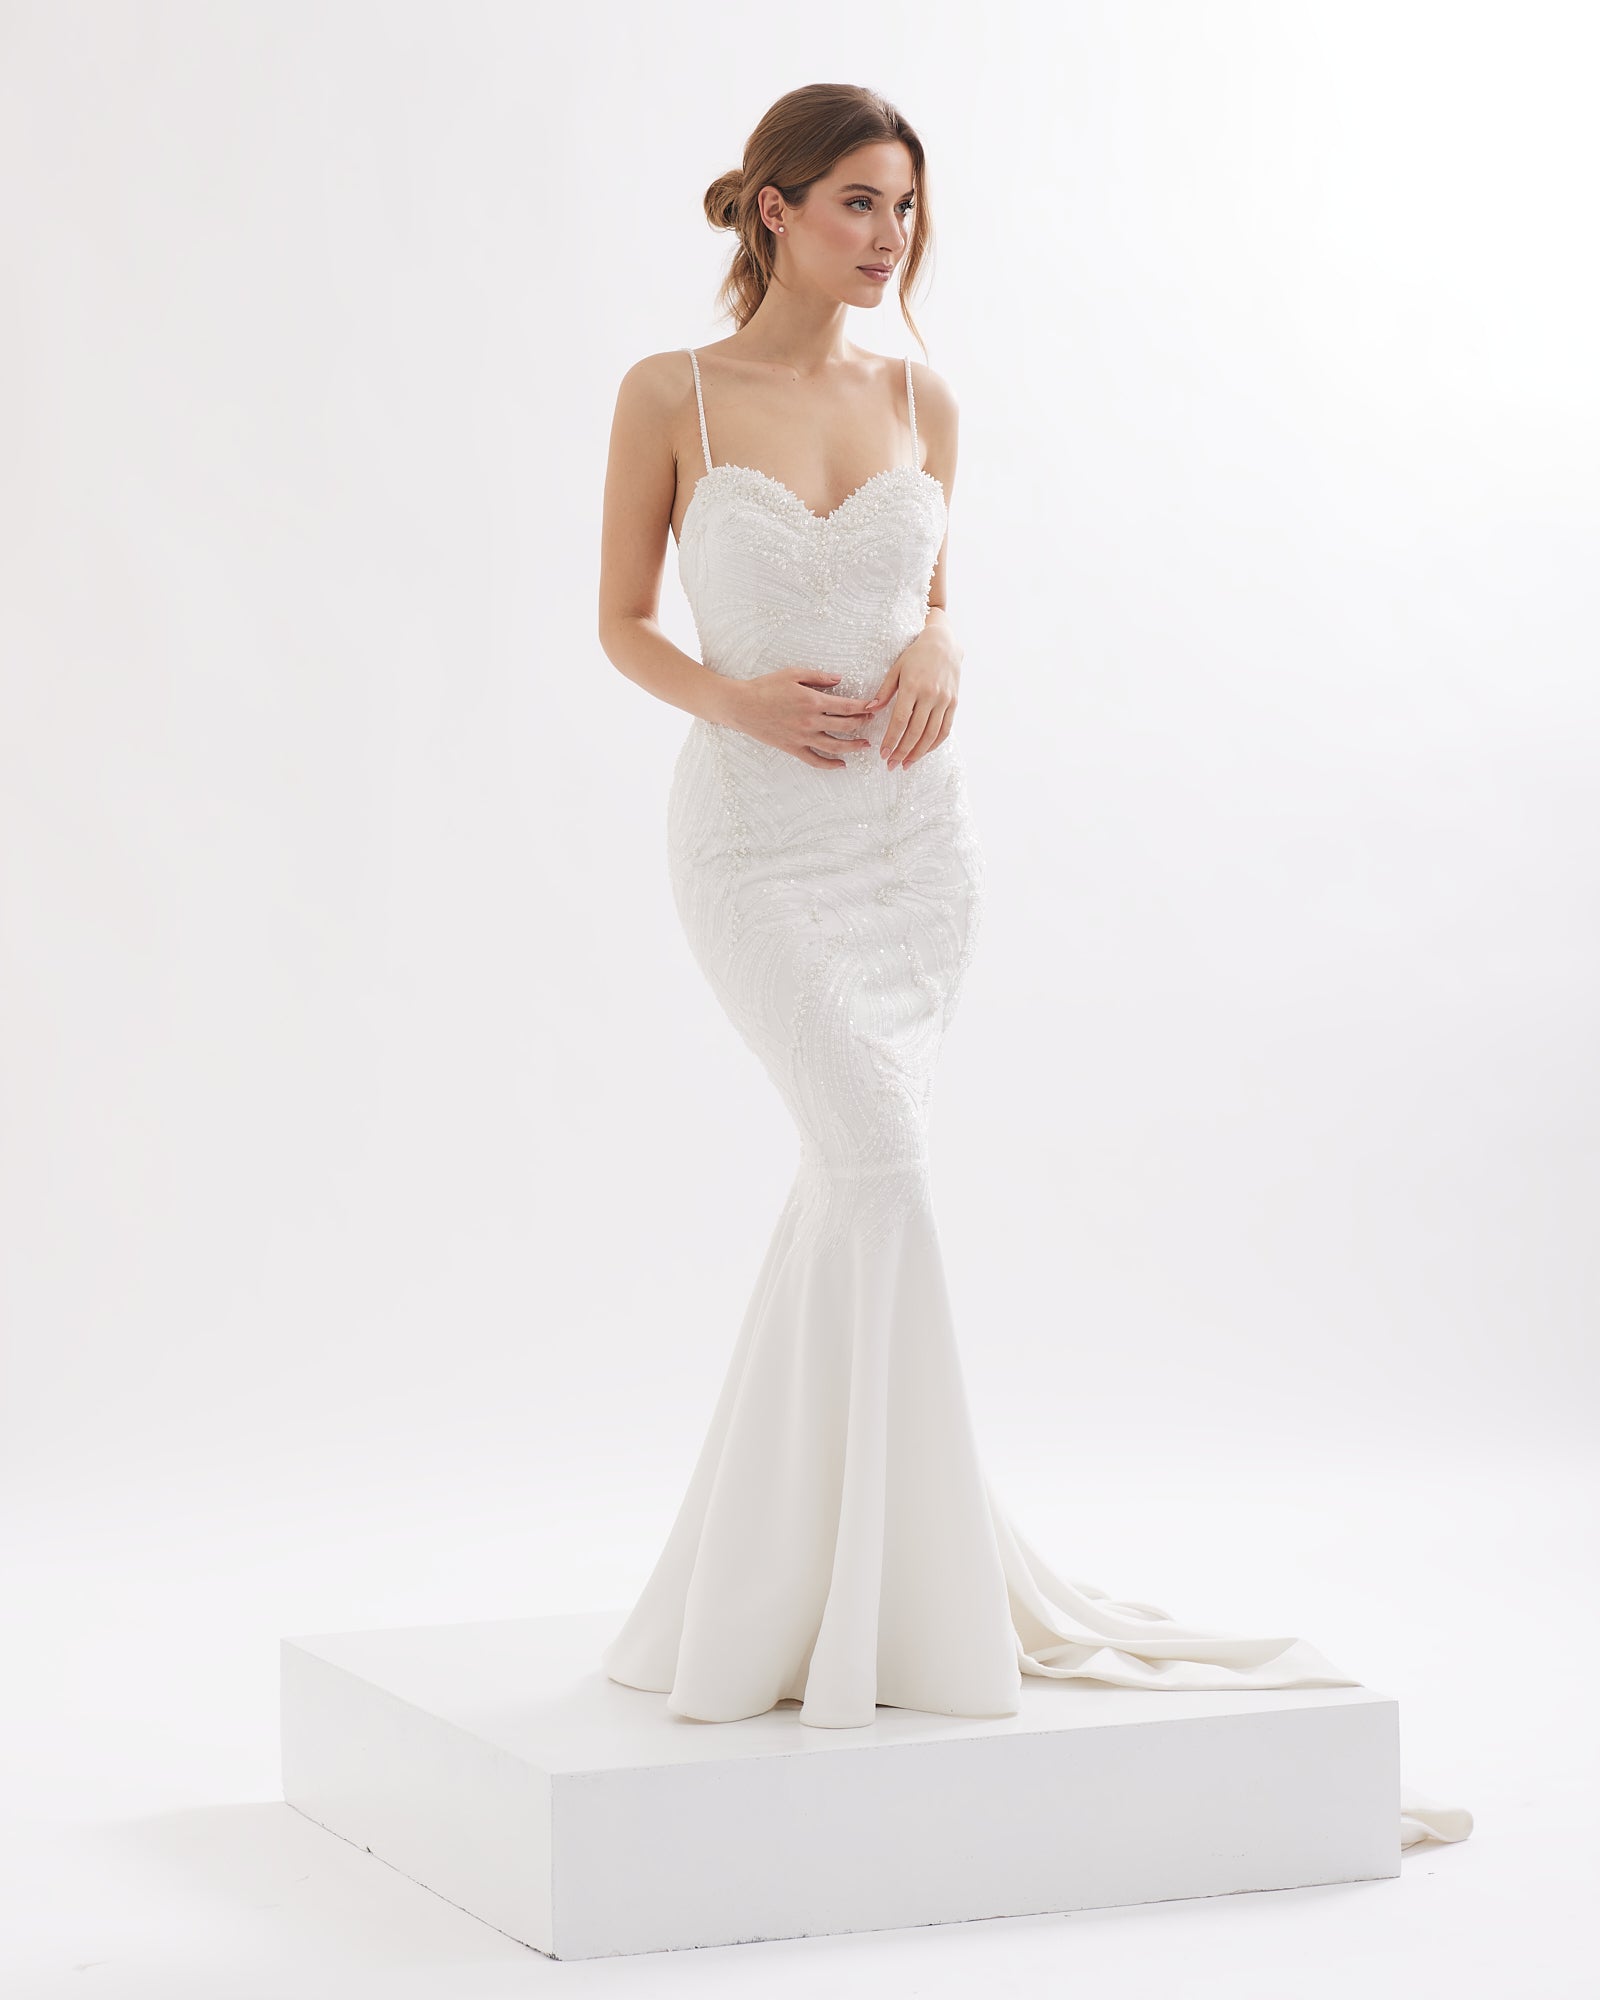 Refined mermaid wedding dress with pearls and open back